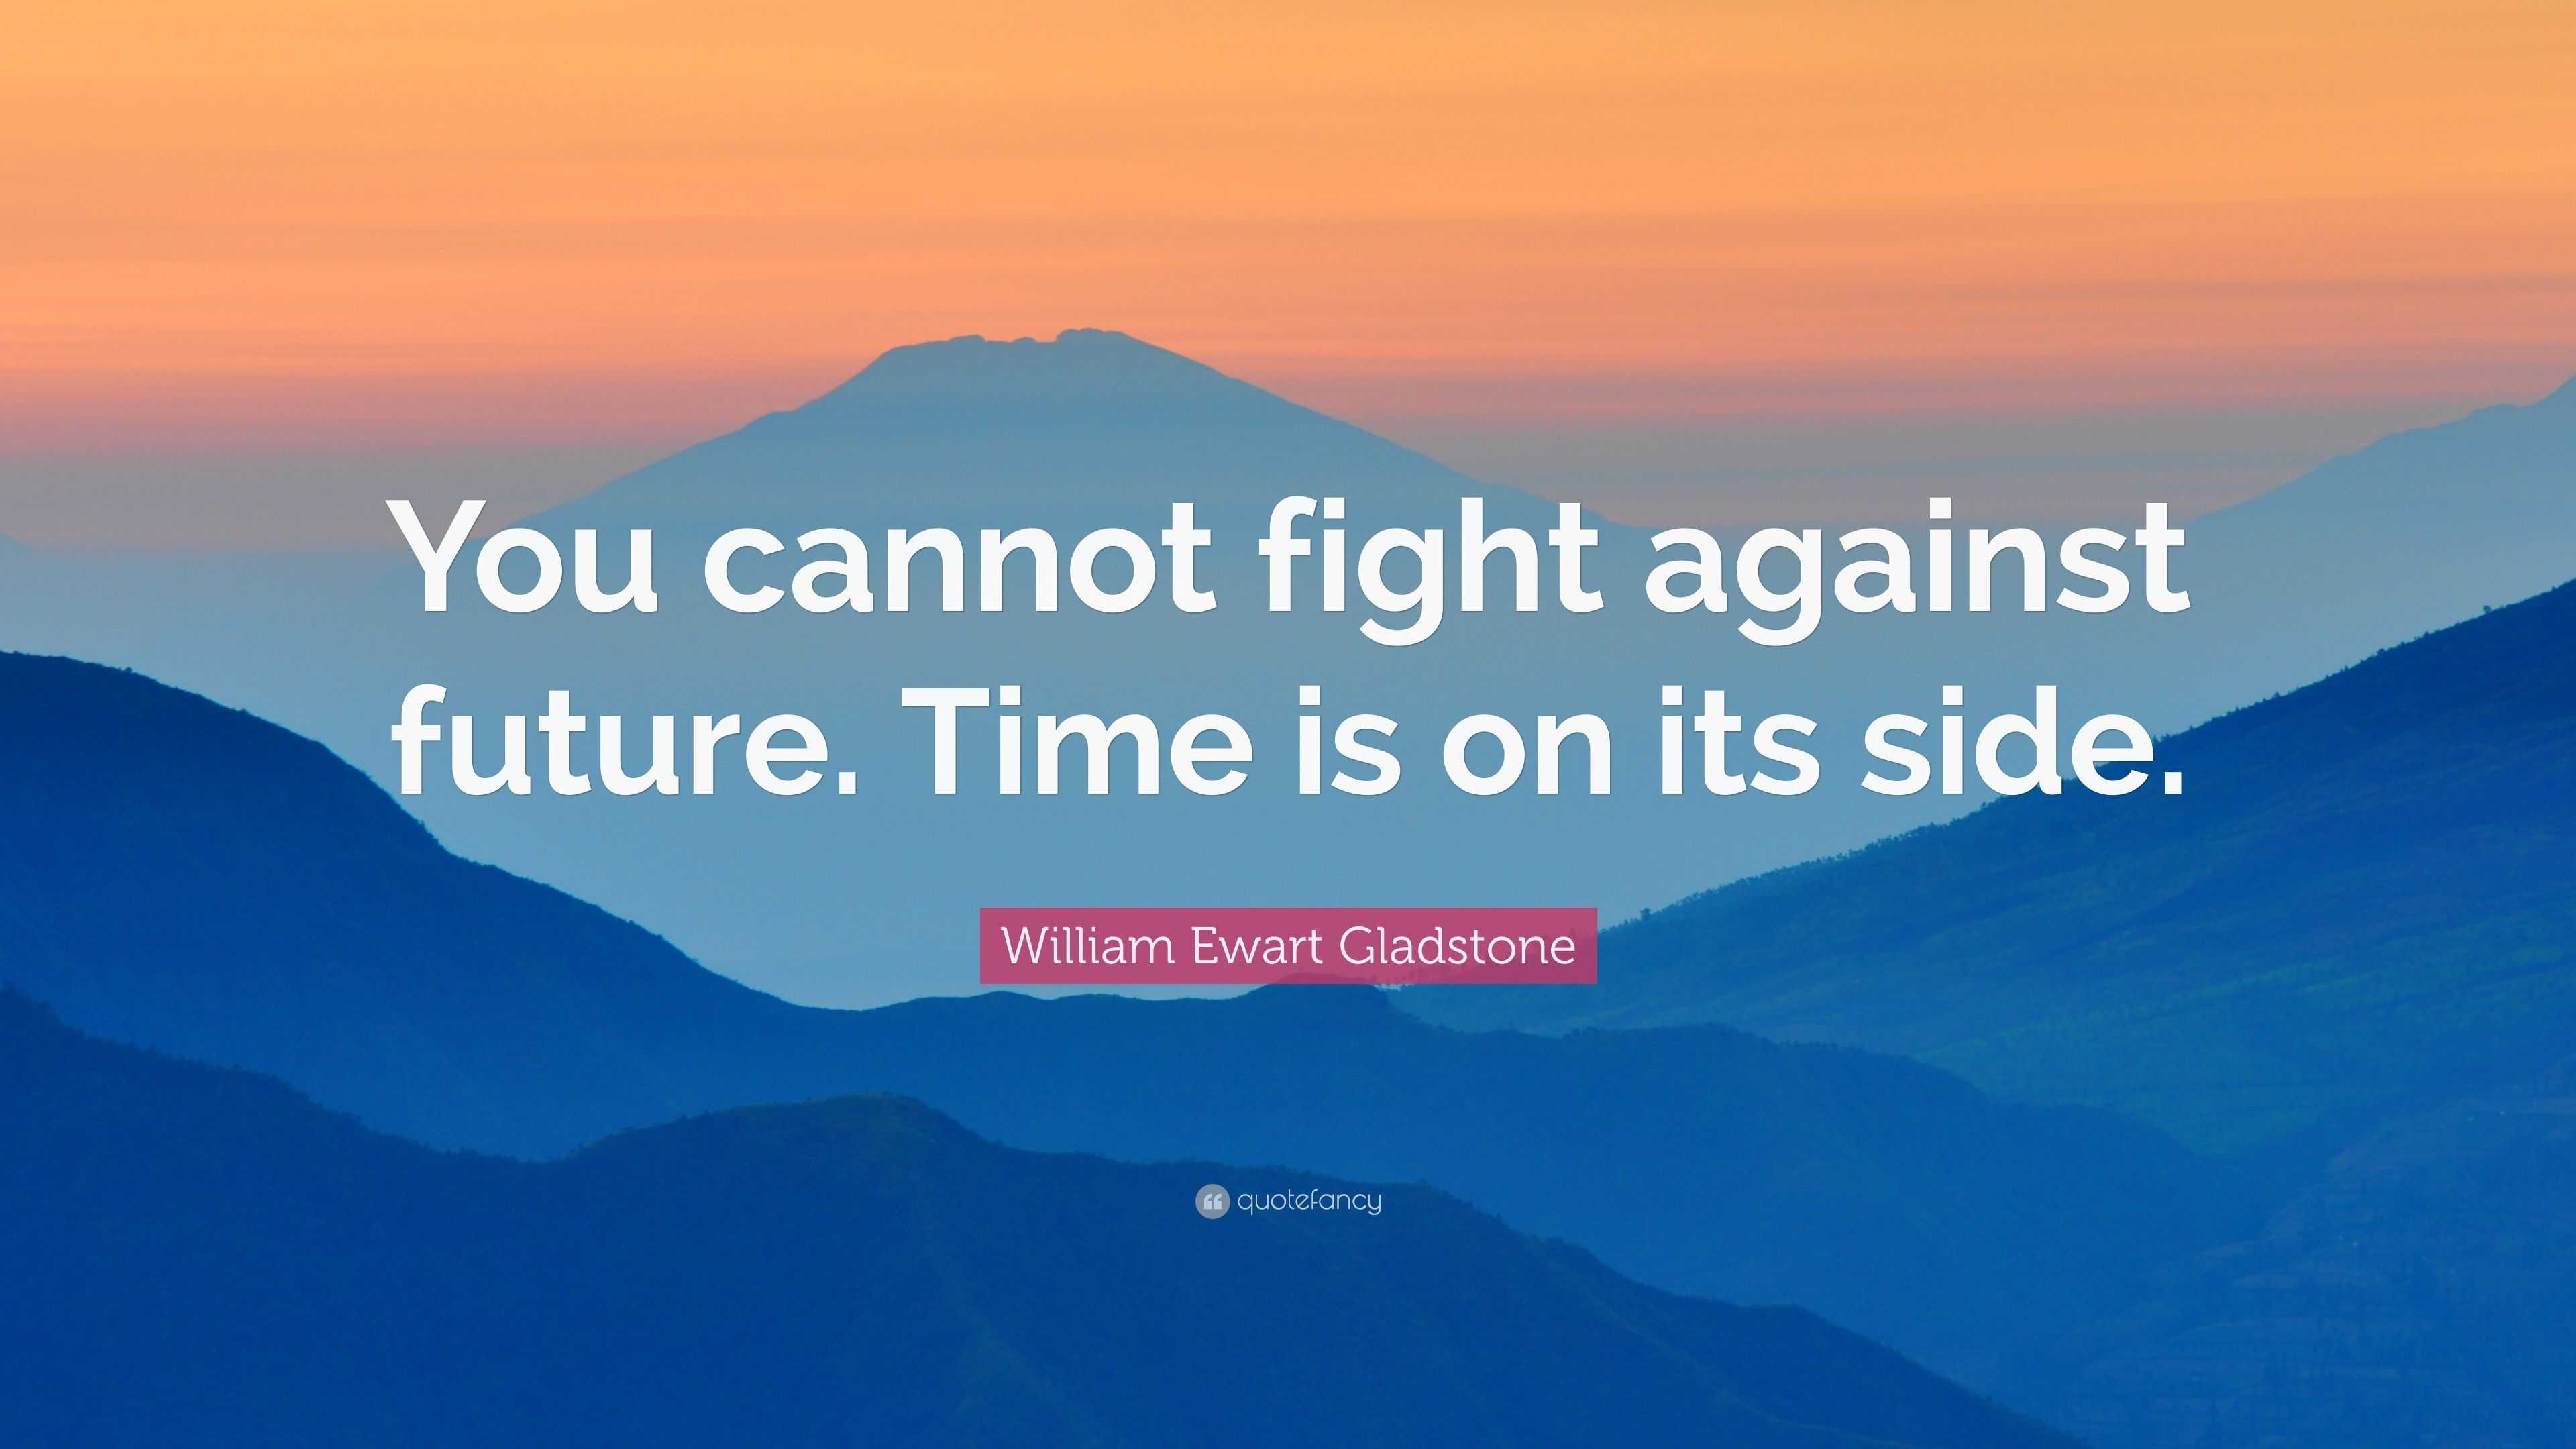 William Ewart Gladstone Quote: “You cannot fight against future. Time ...